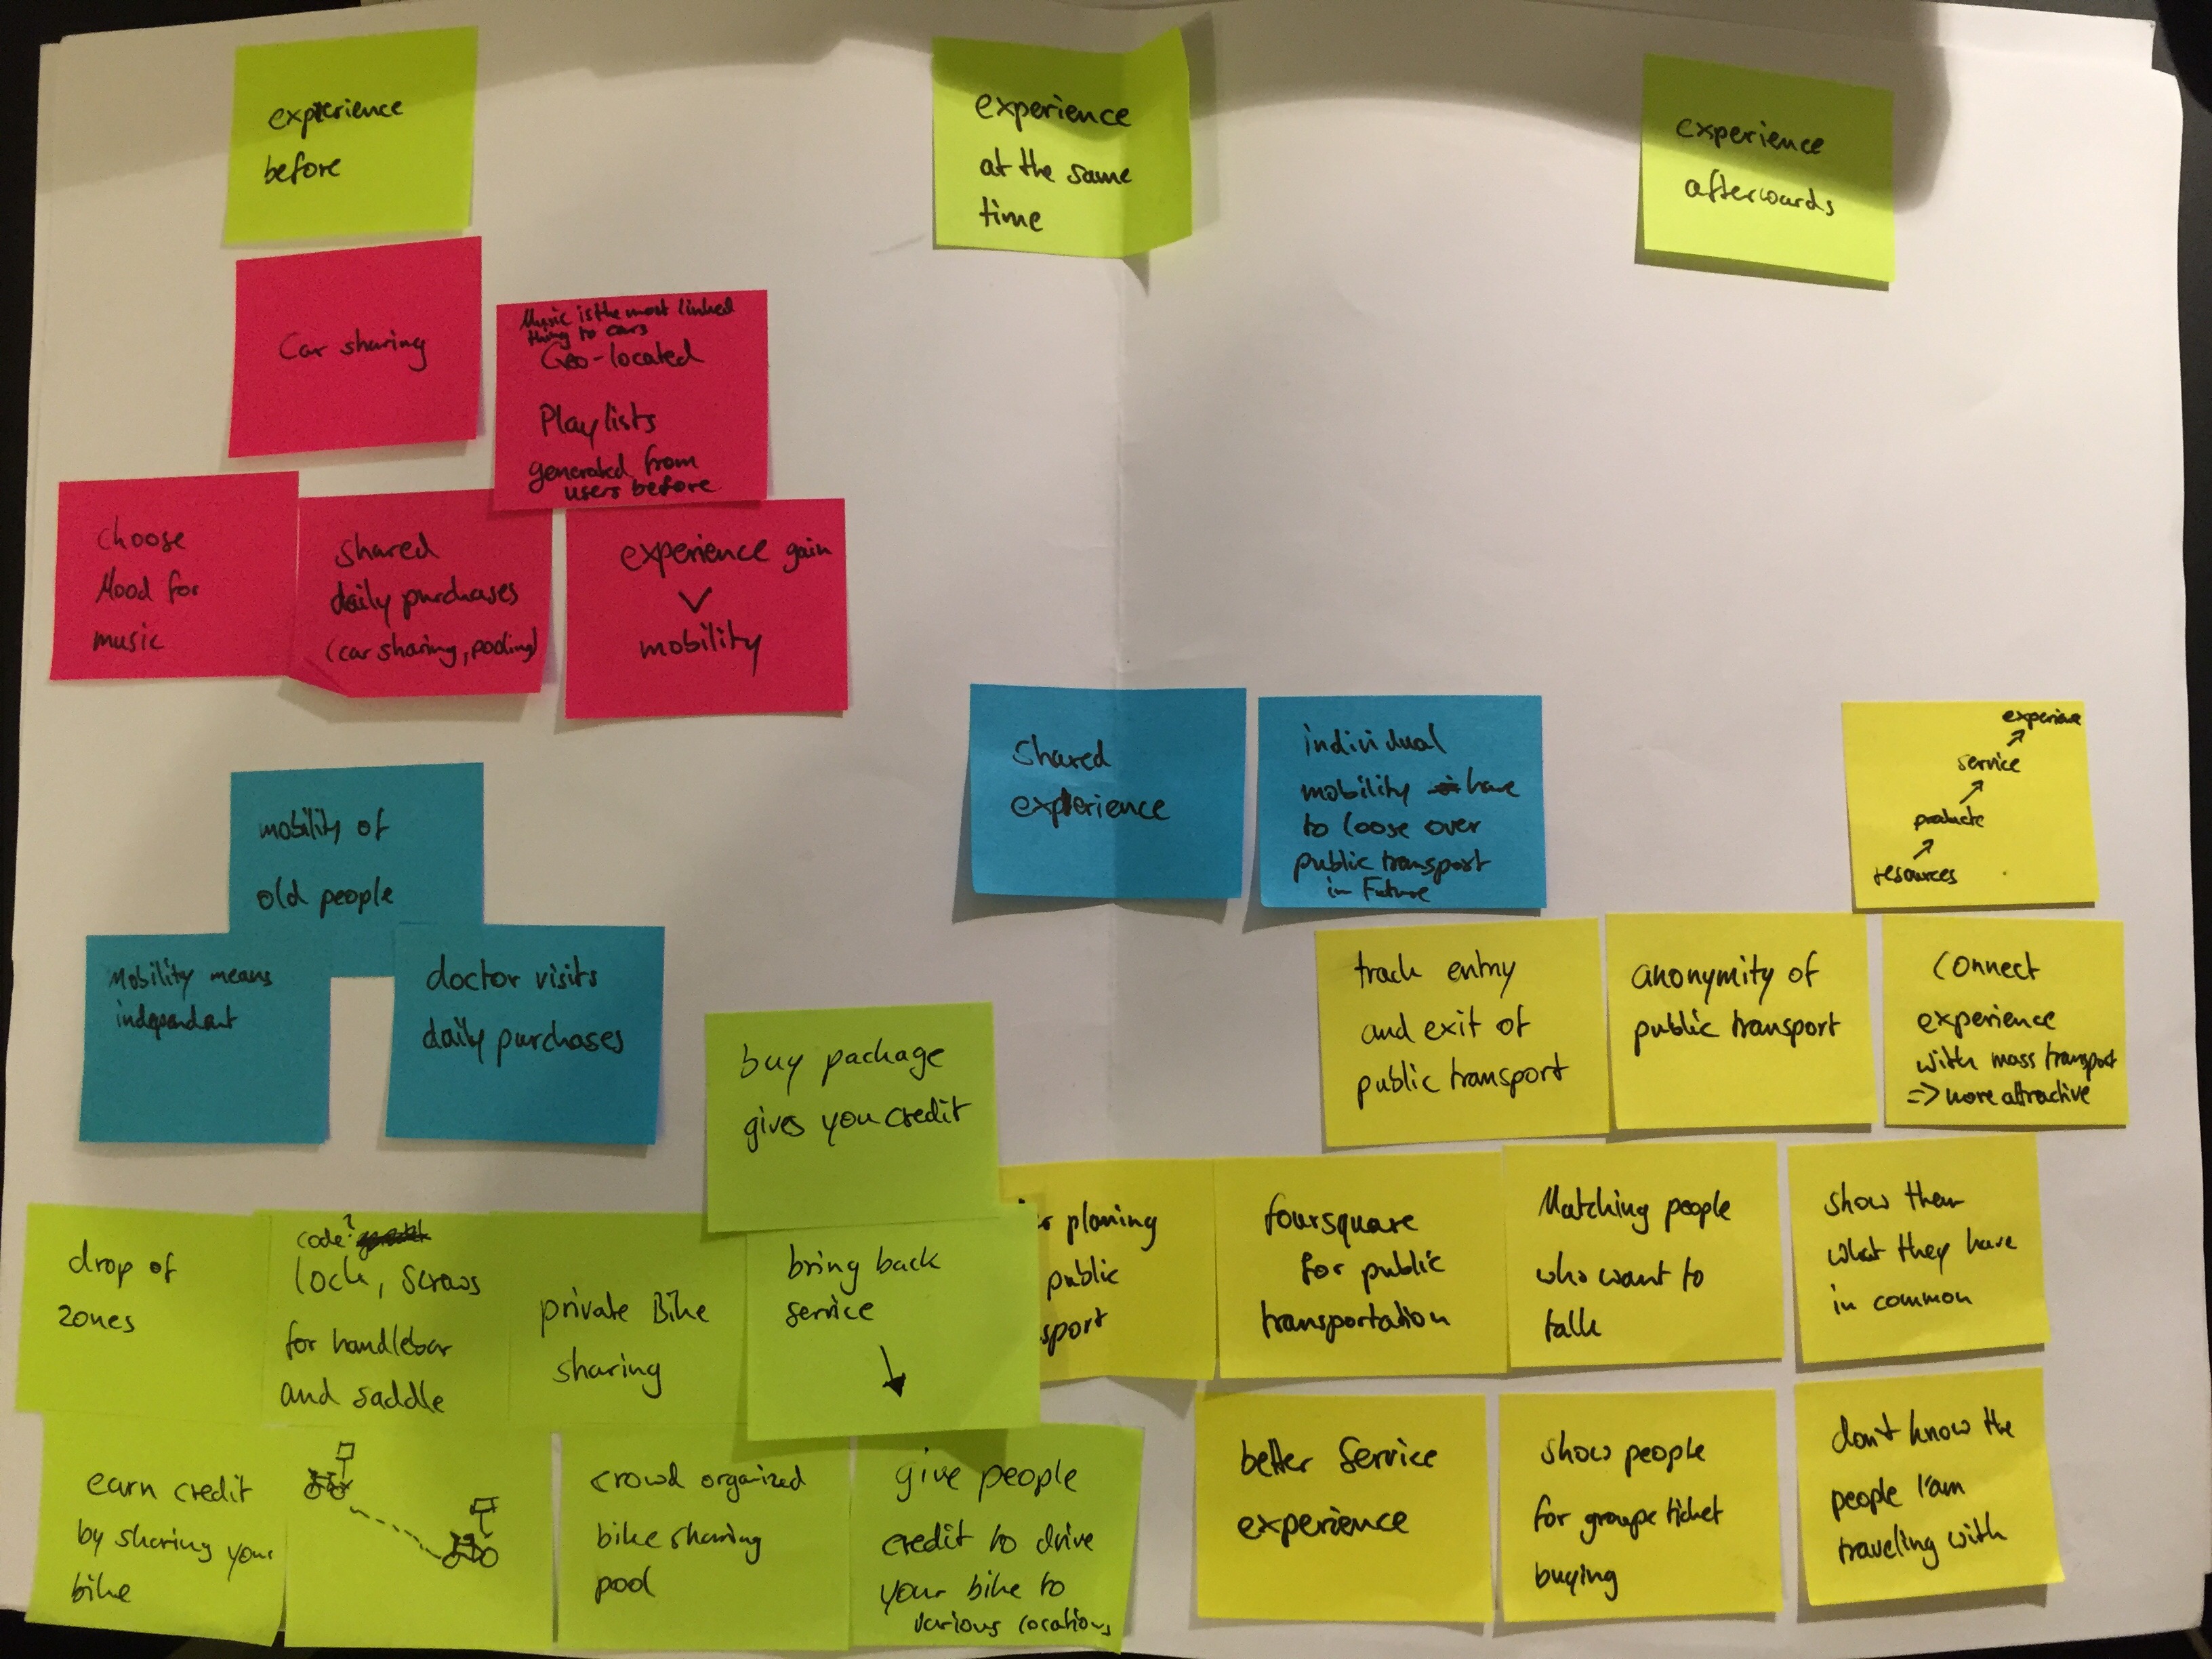 brainstorm-mapping-future-mobility